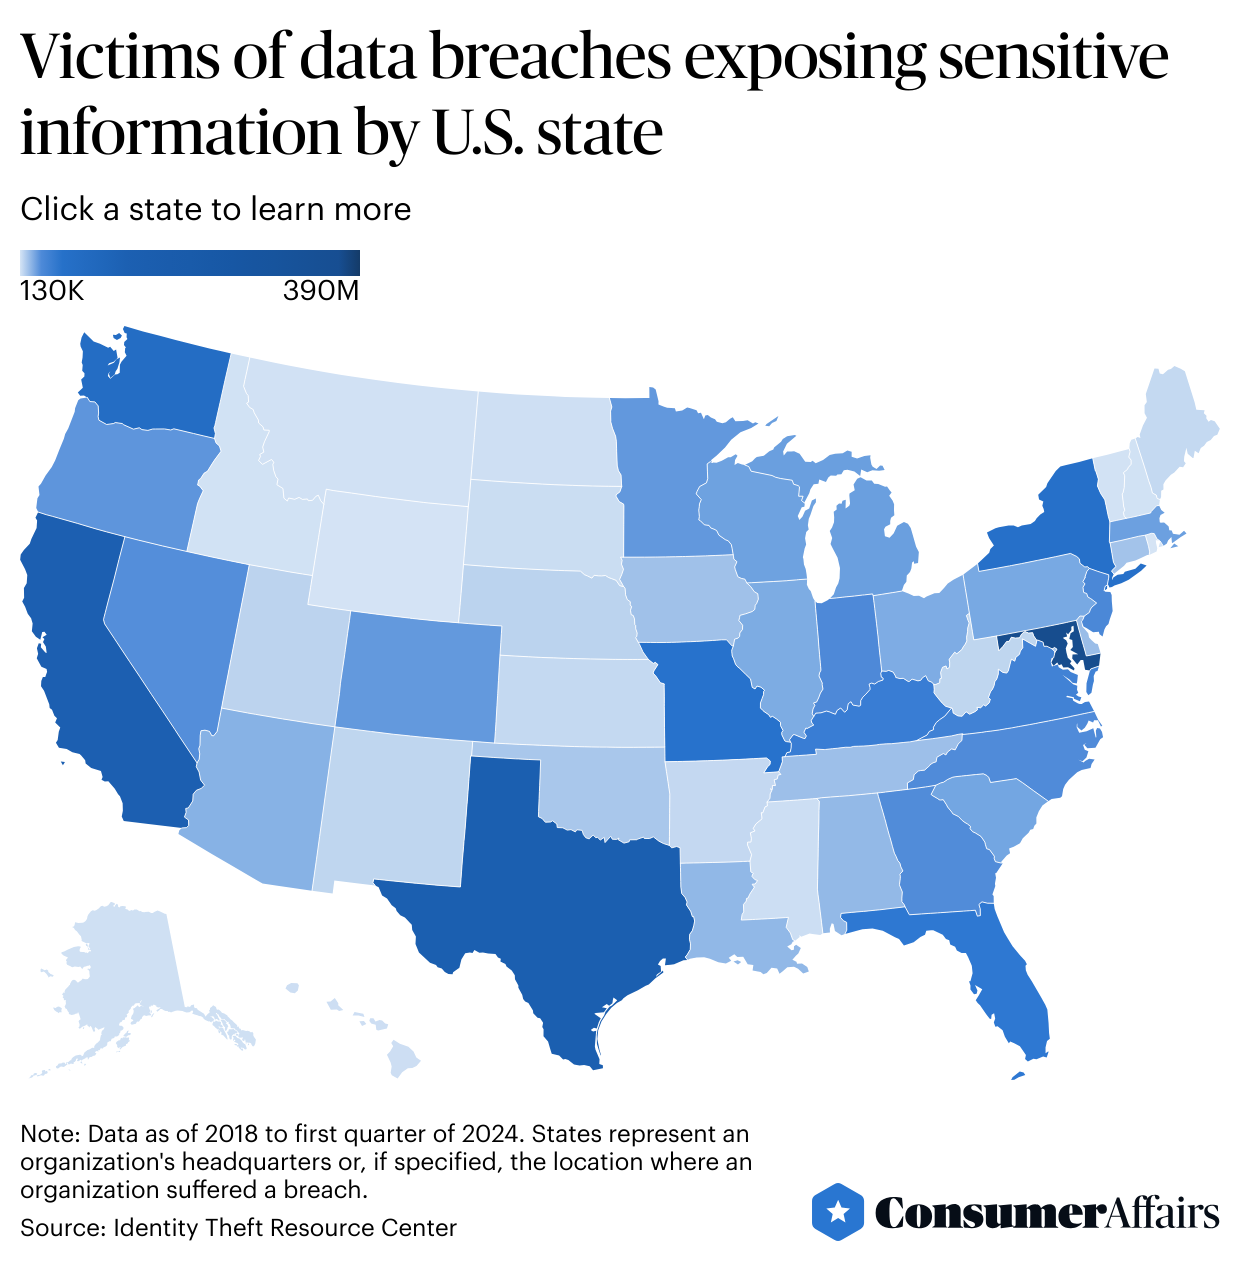 Heatmap for “Victims of data breaches exposing sensitive information by U.S. state”.